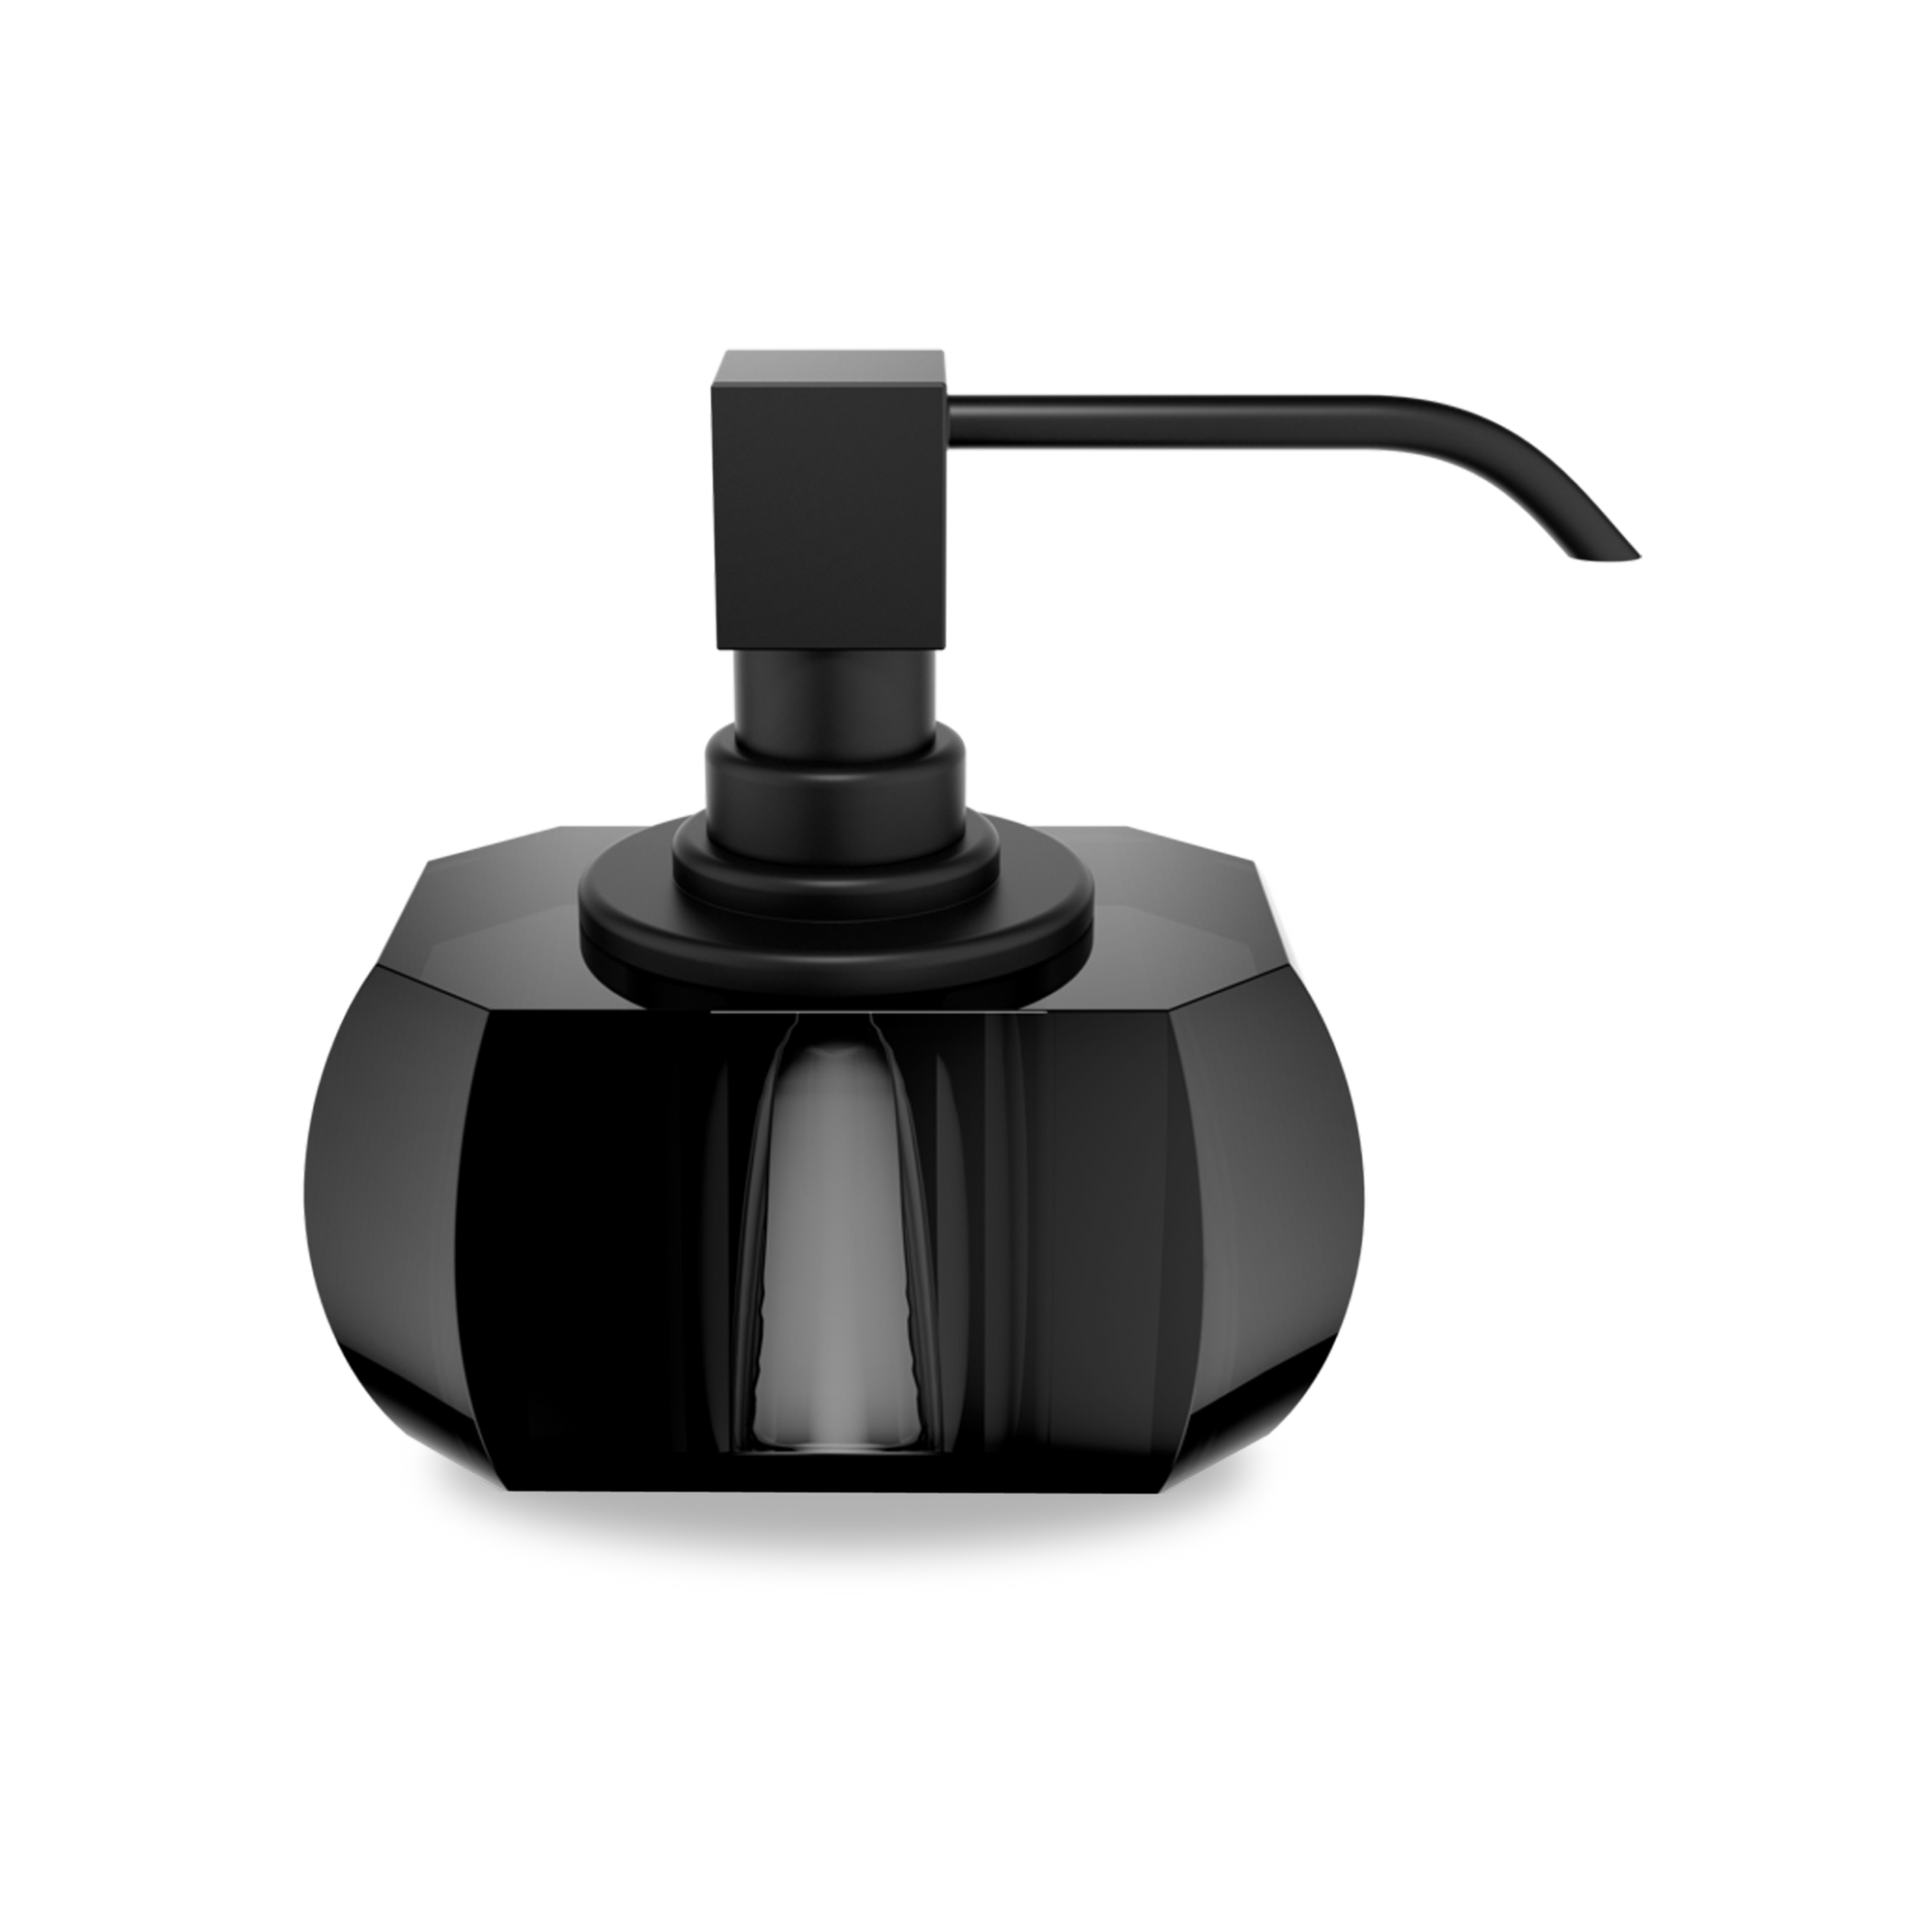 The Kristall Soap Dispenser is made of brilliant crystal glass in an anthracite colour with matte black details.